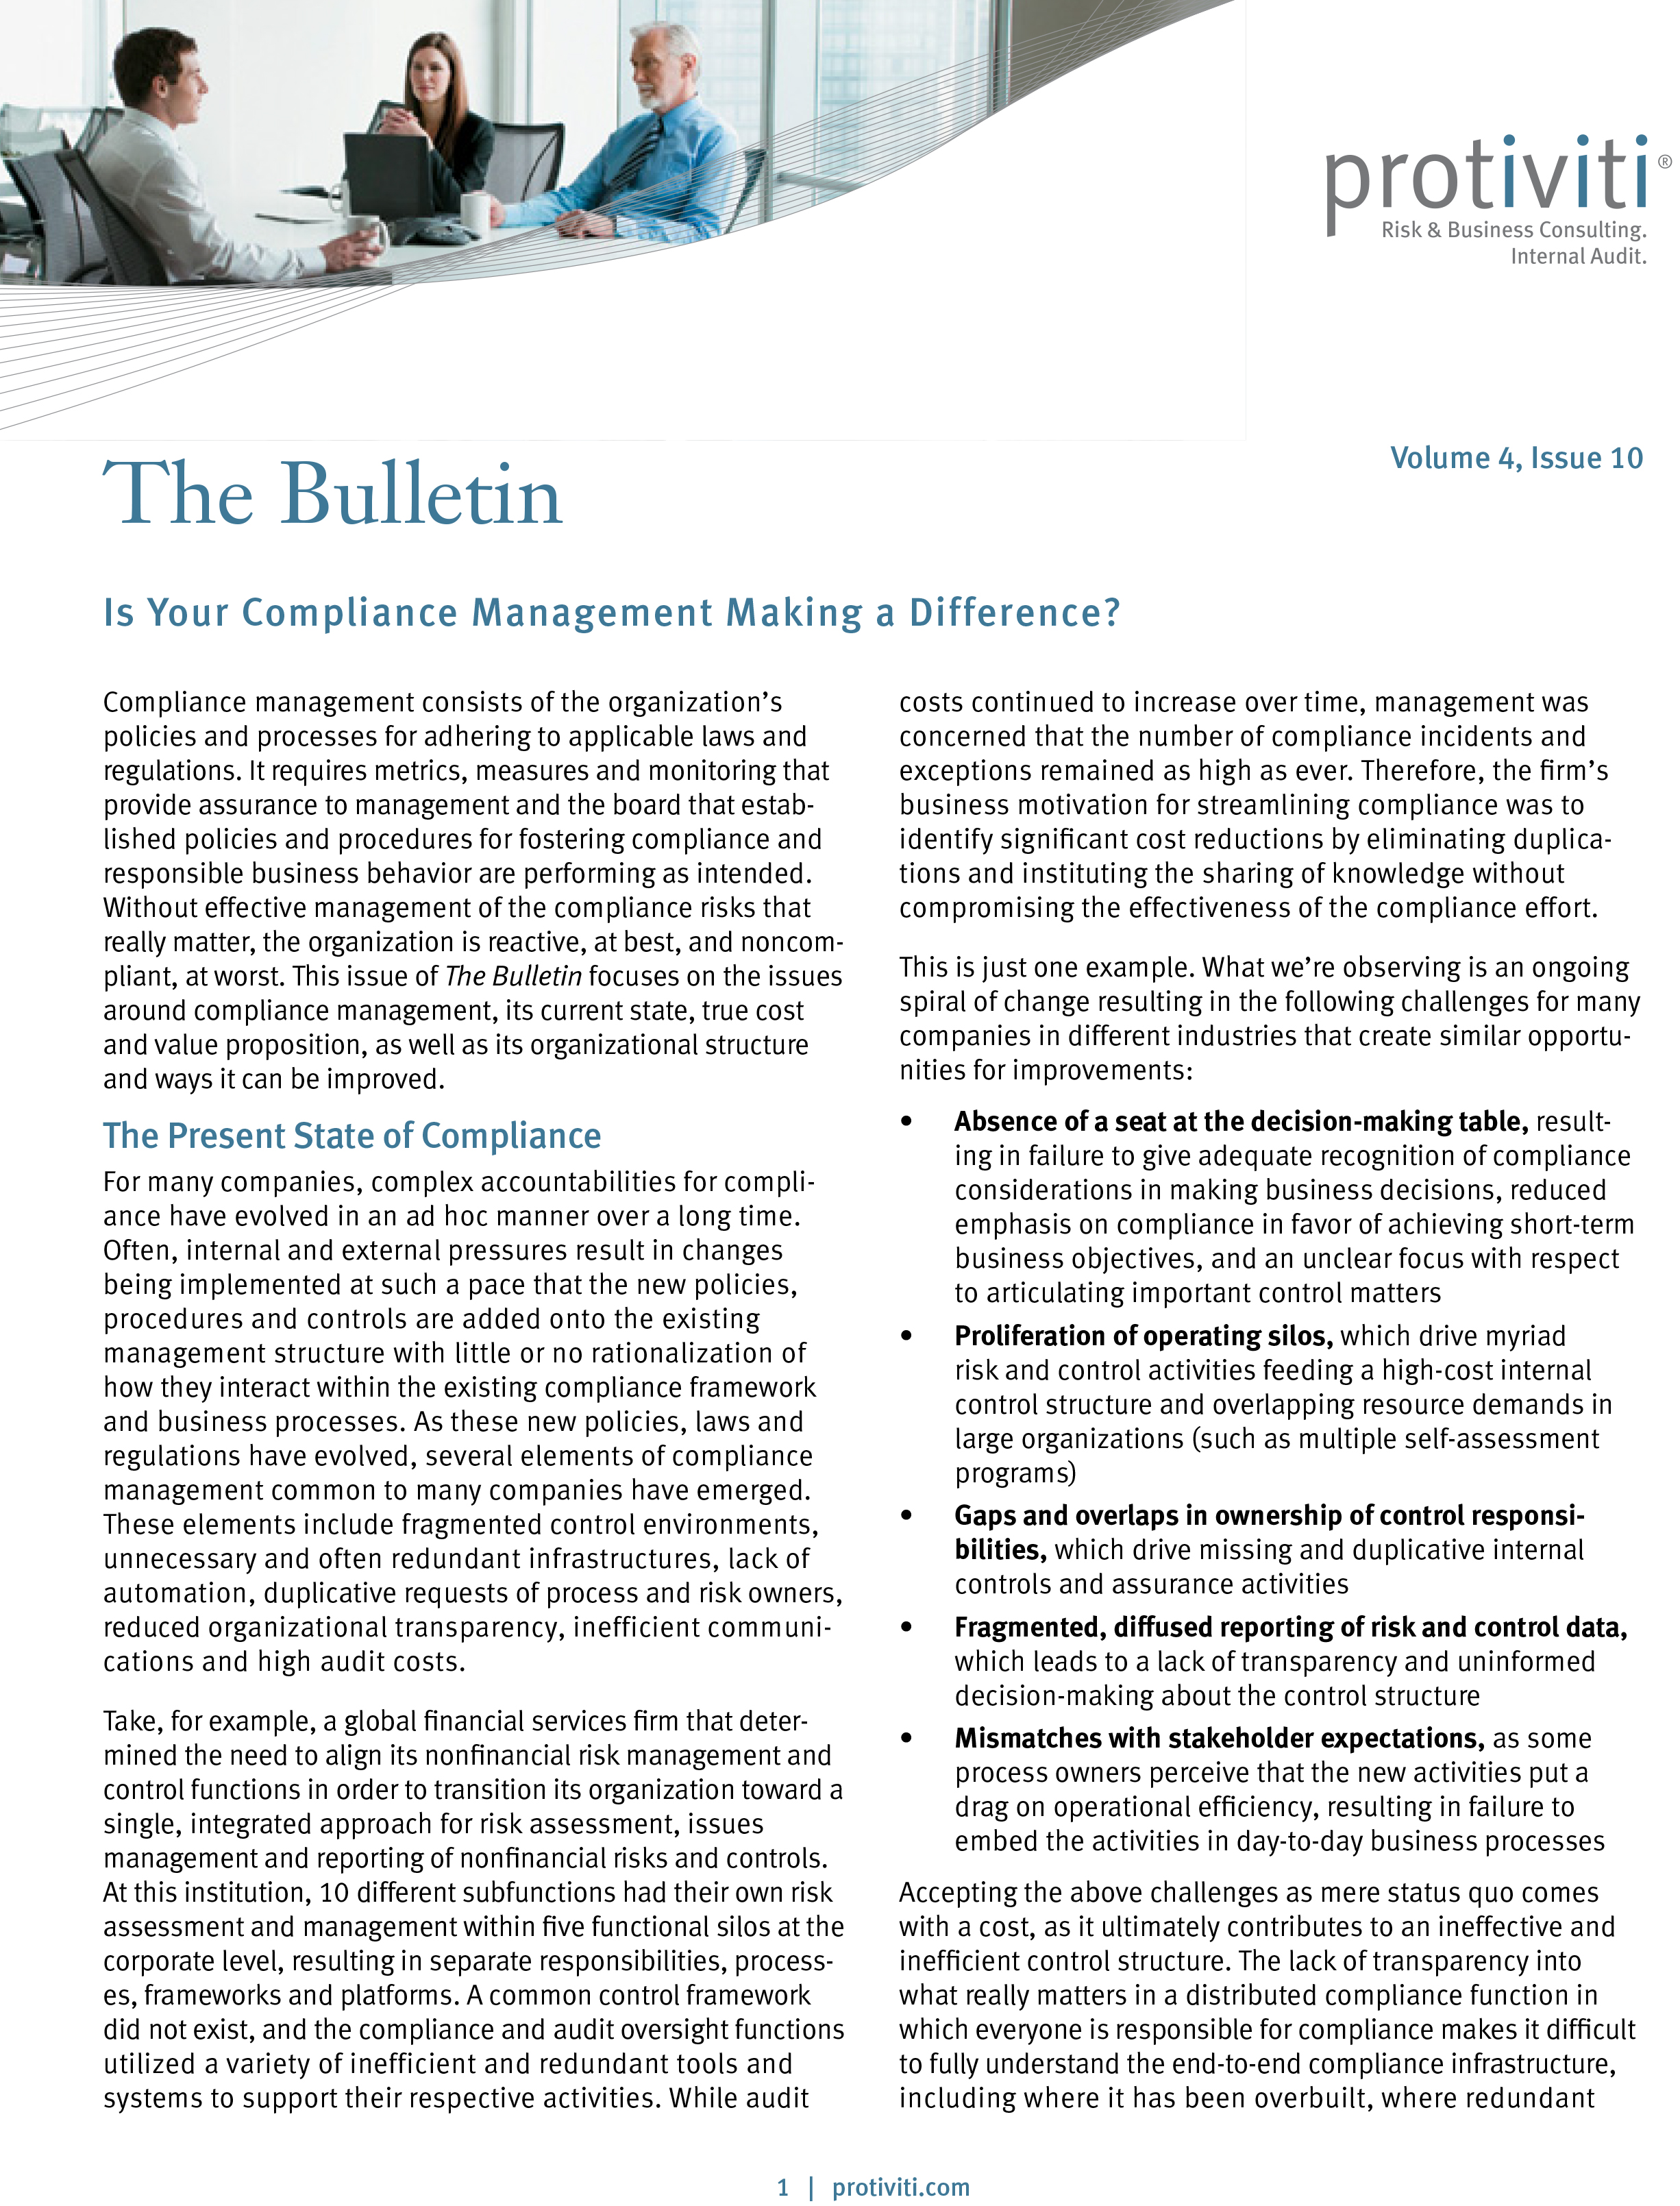 Screenshot of the first page of Is Your Compliance Management Making a Difference - The Bulletin, Volume 4, Issue 10